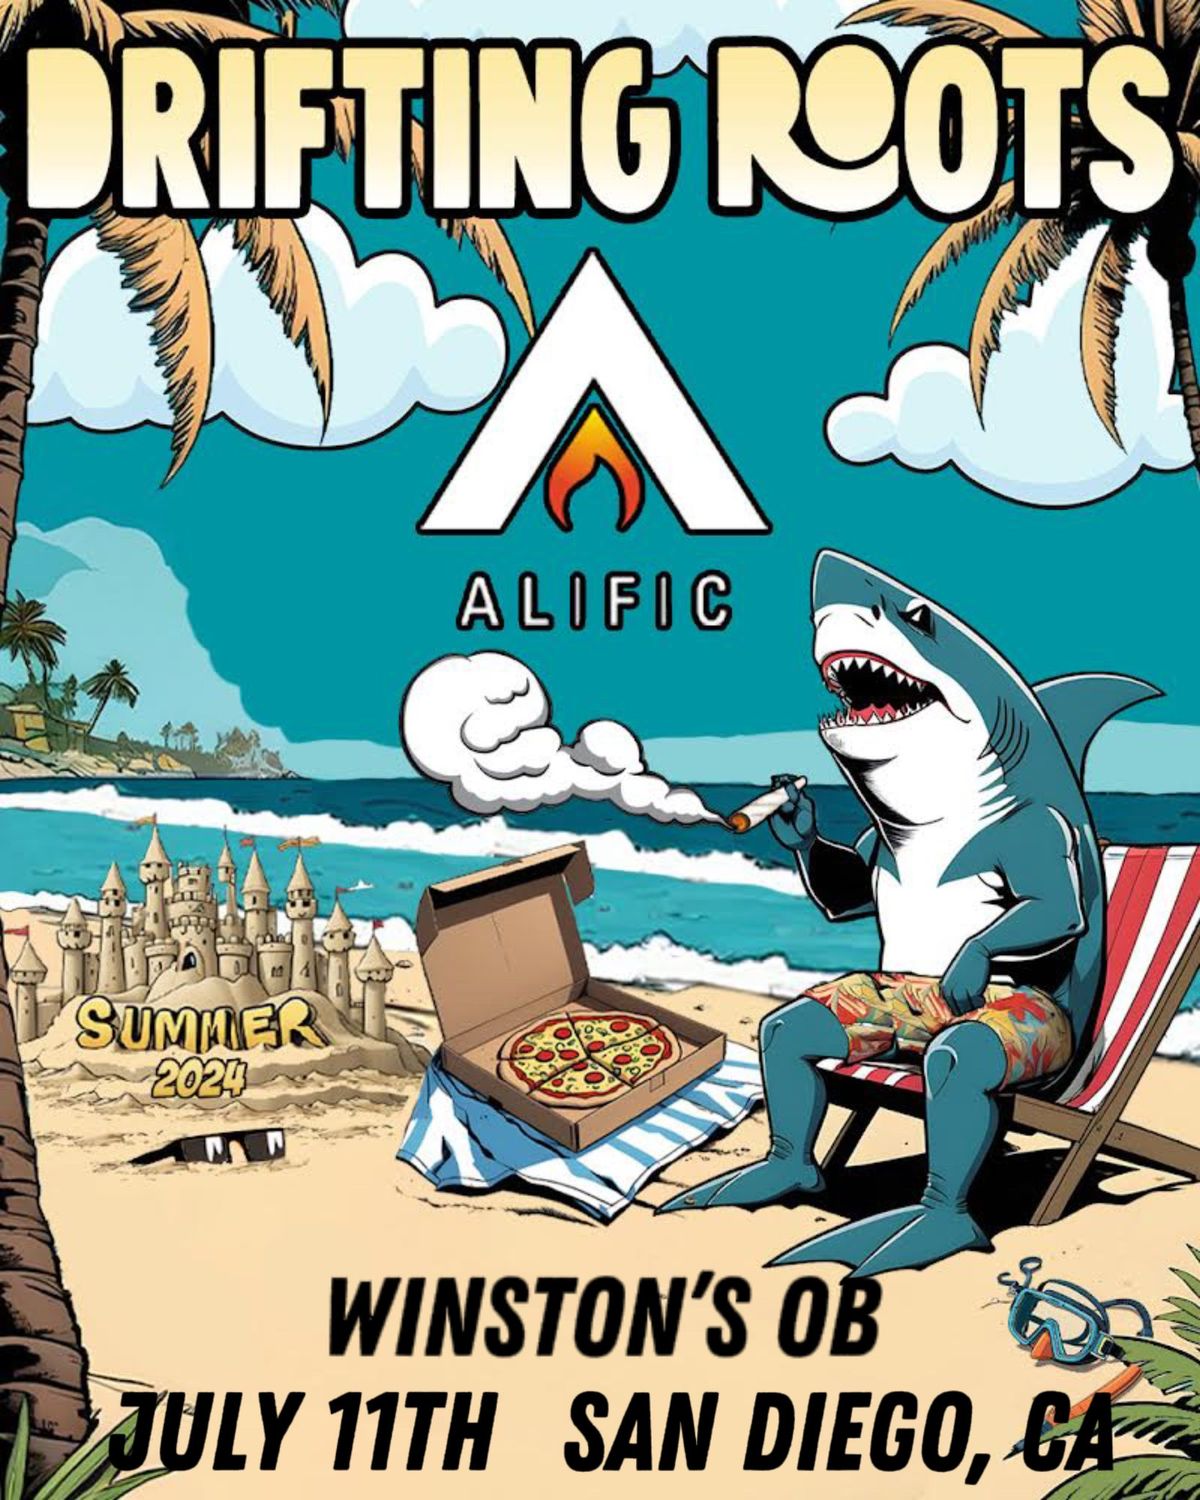 Drifting Roots & Alific live at Winstons OB